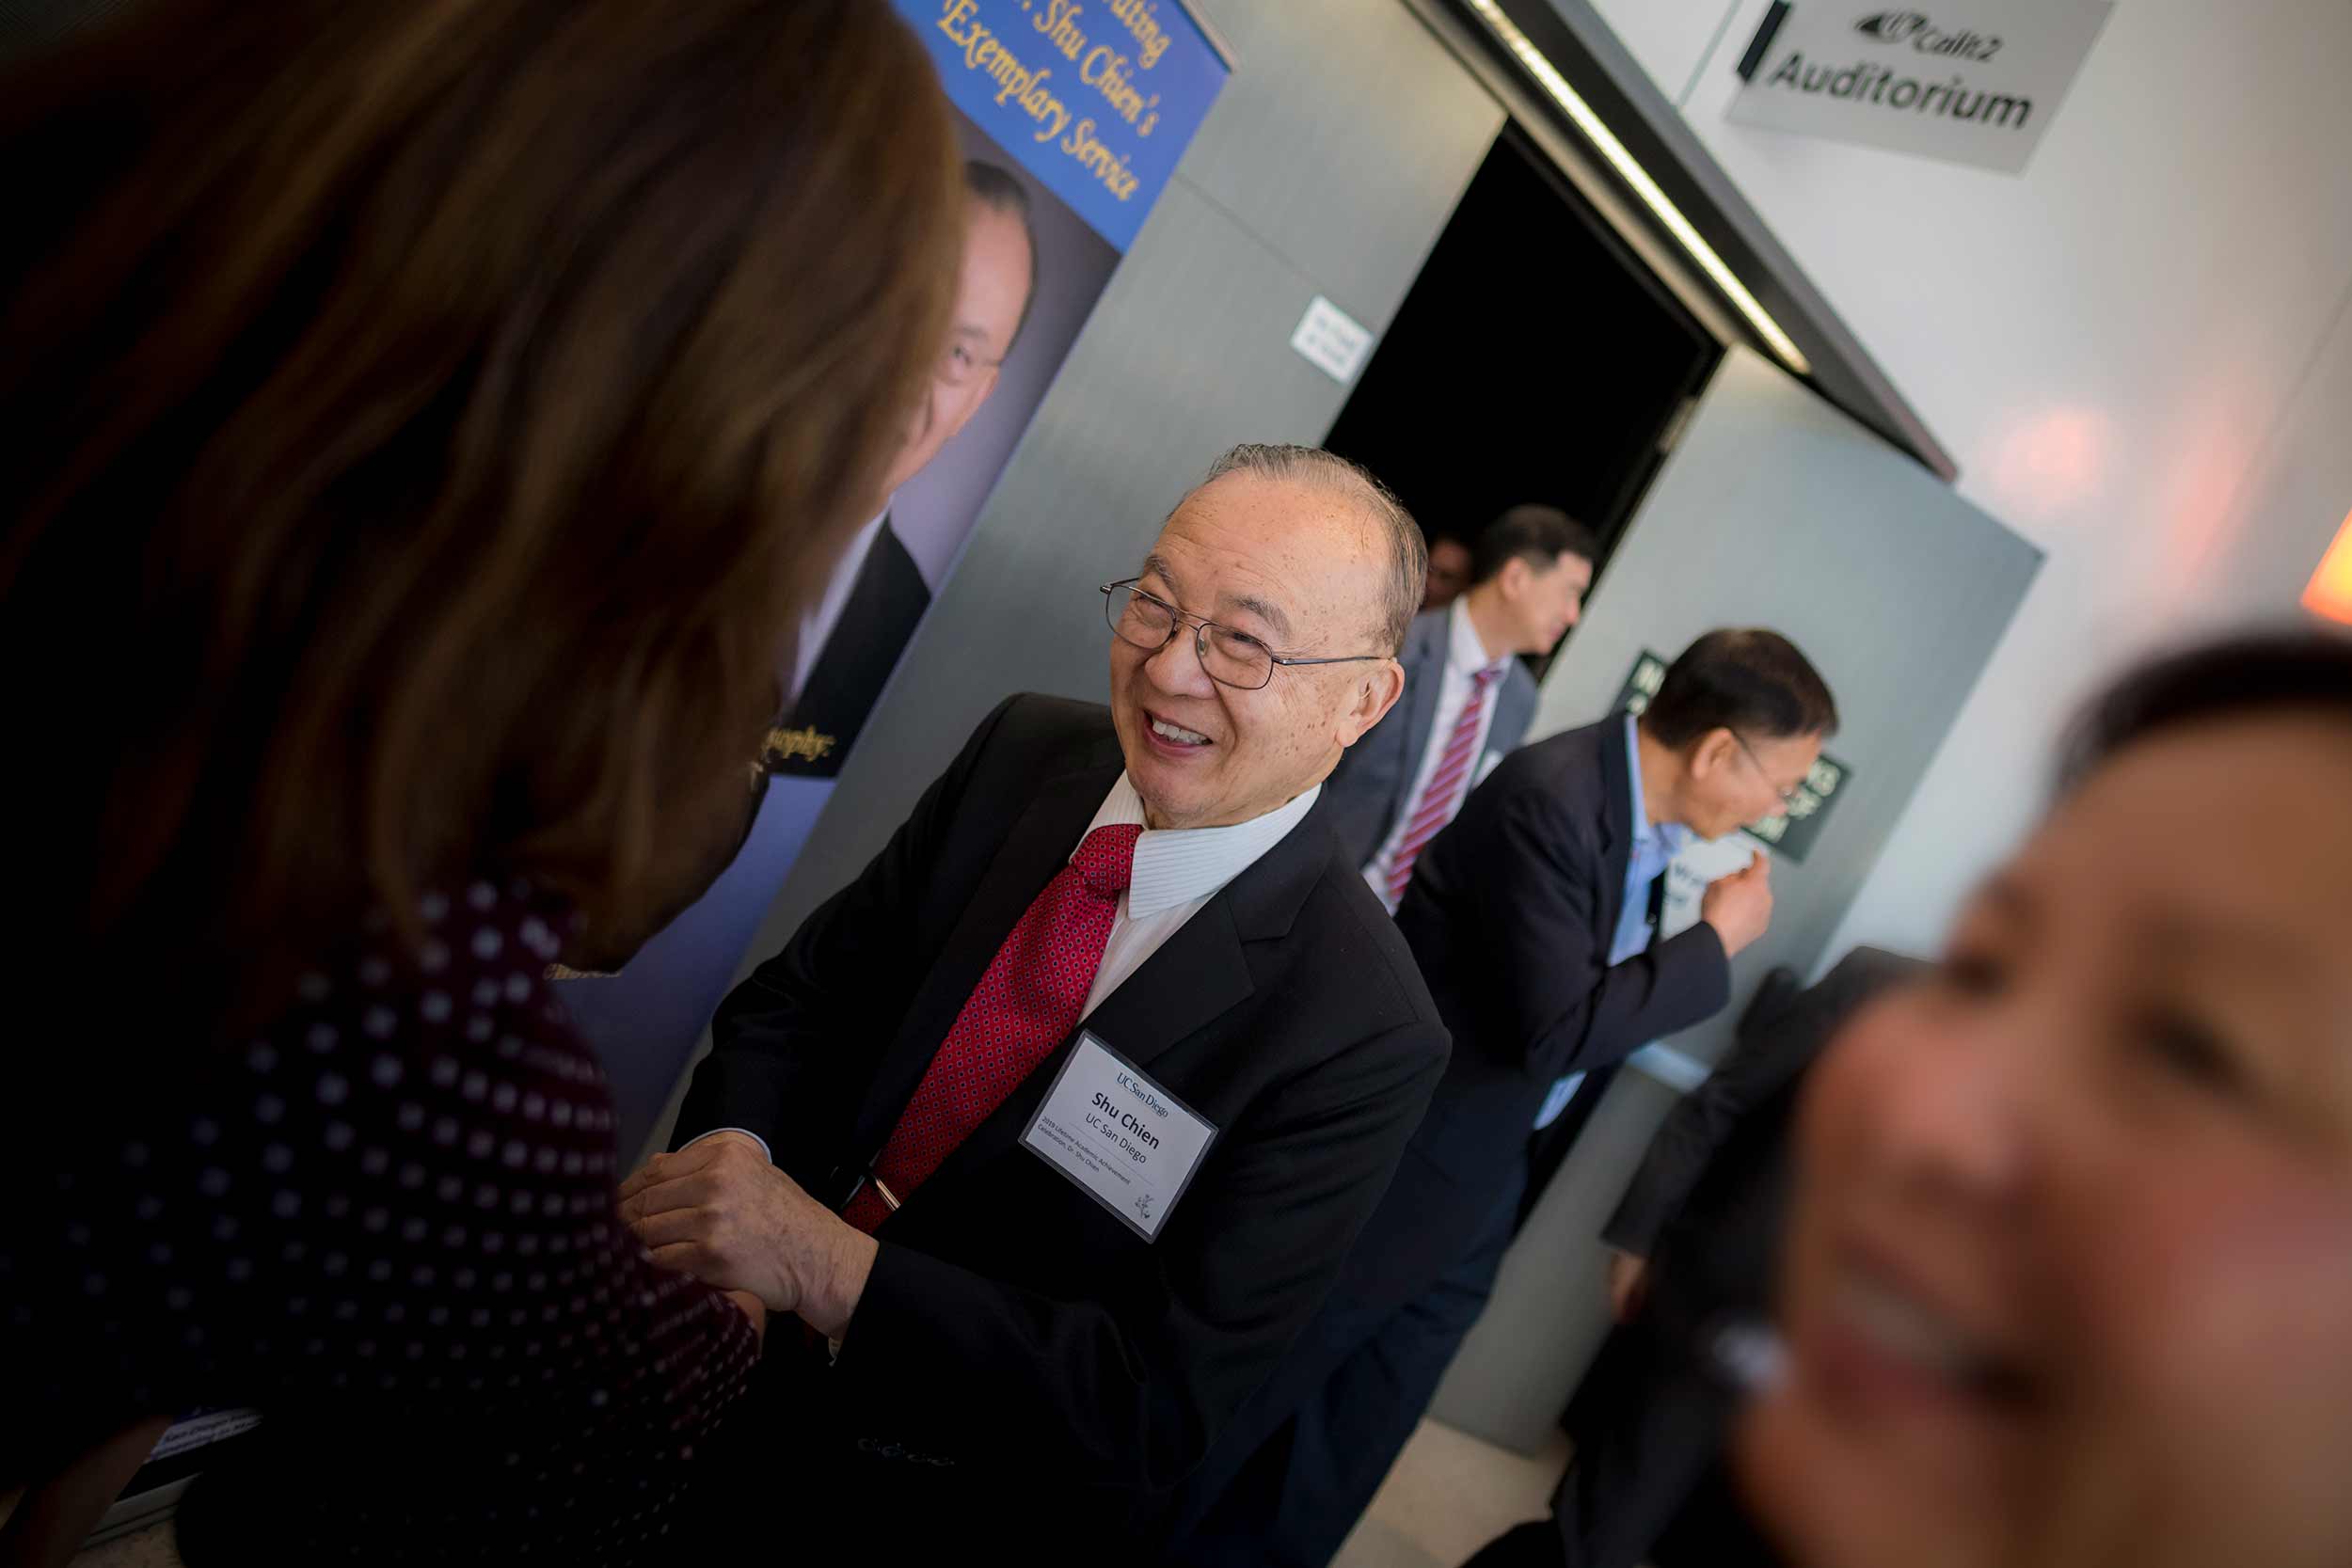 Shu Chien greets the more than 200 people who attended the celebration in honor of his retirement. (Photo by Erik Jepsen/UC San Diego Publications)